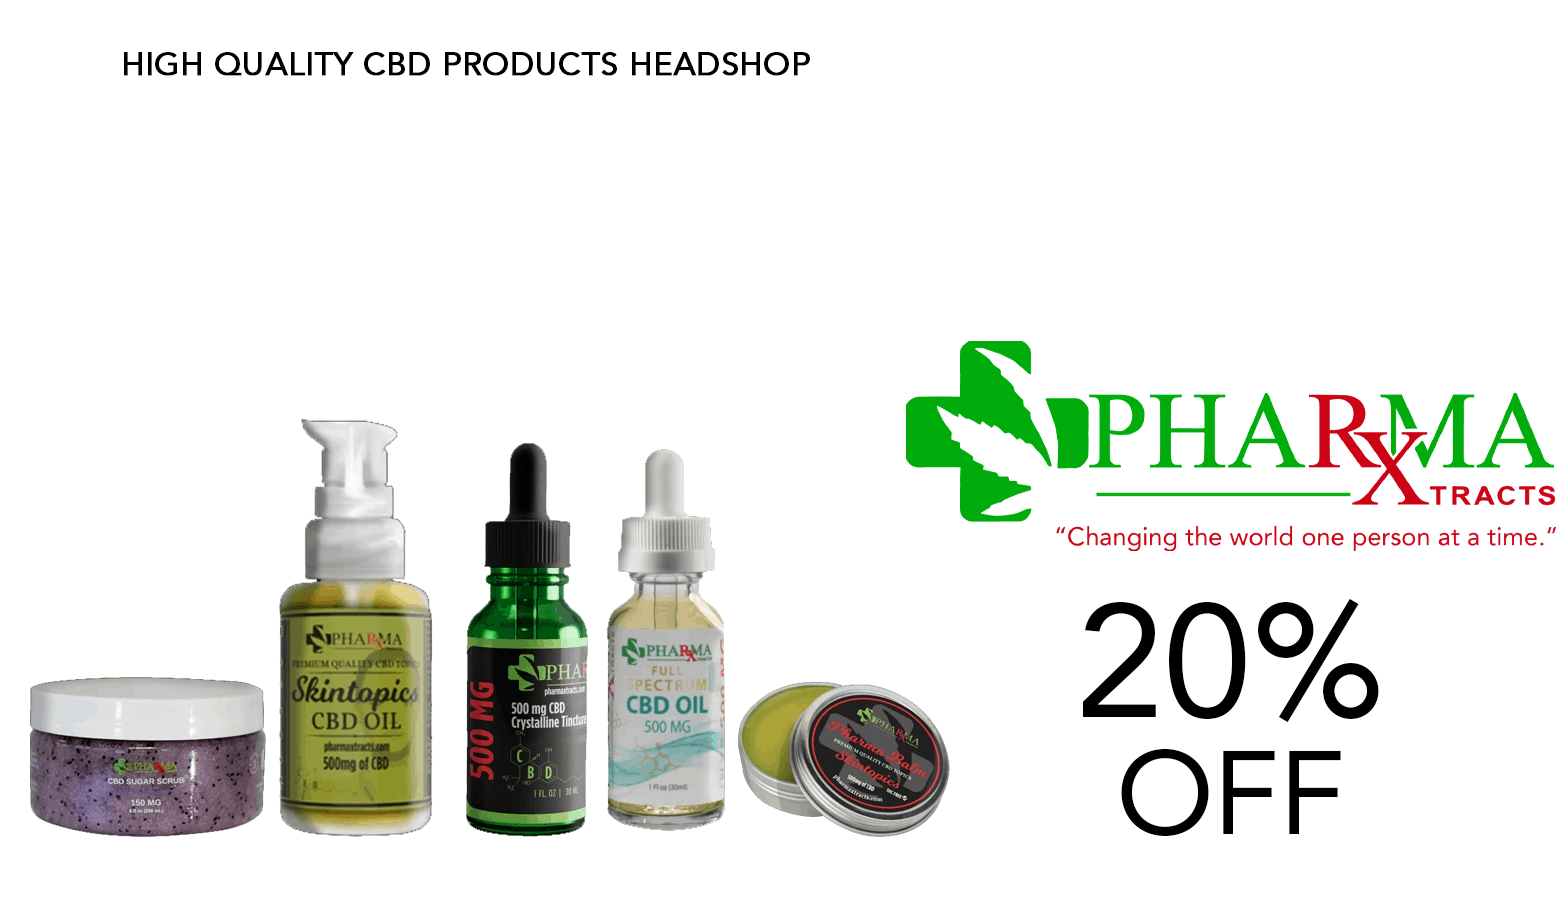 PharmaXtracts CBD Coupon Code Offer Website